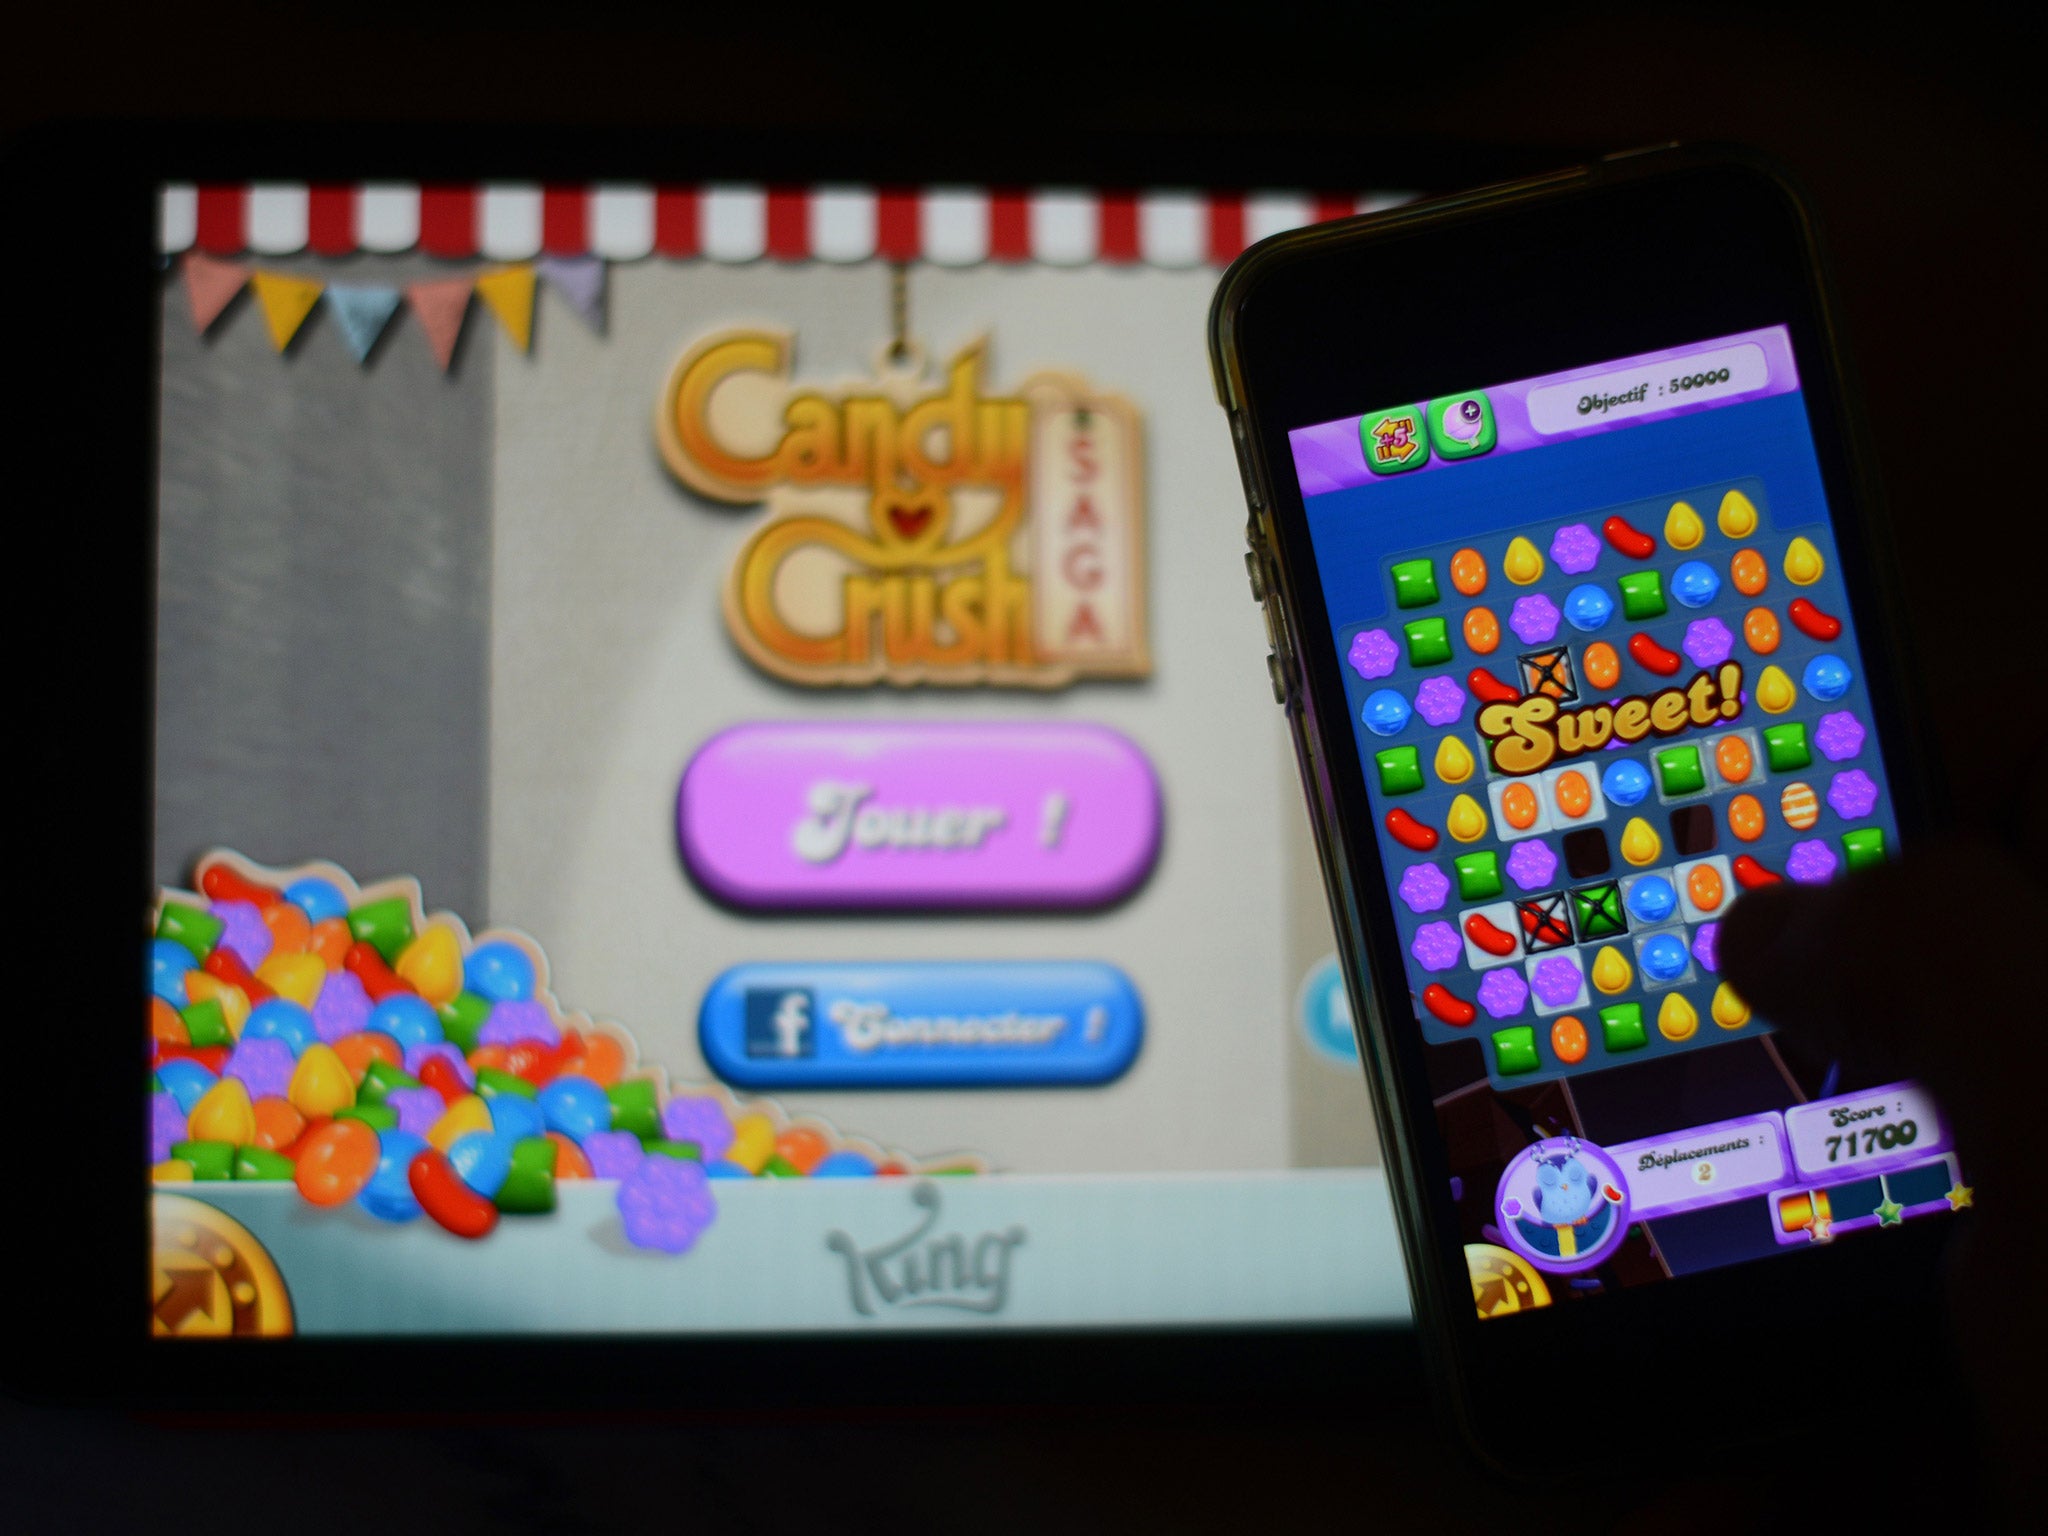 This Is How To Remove Candy Crush From Windows 10